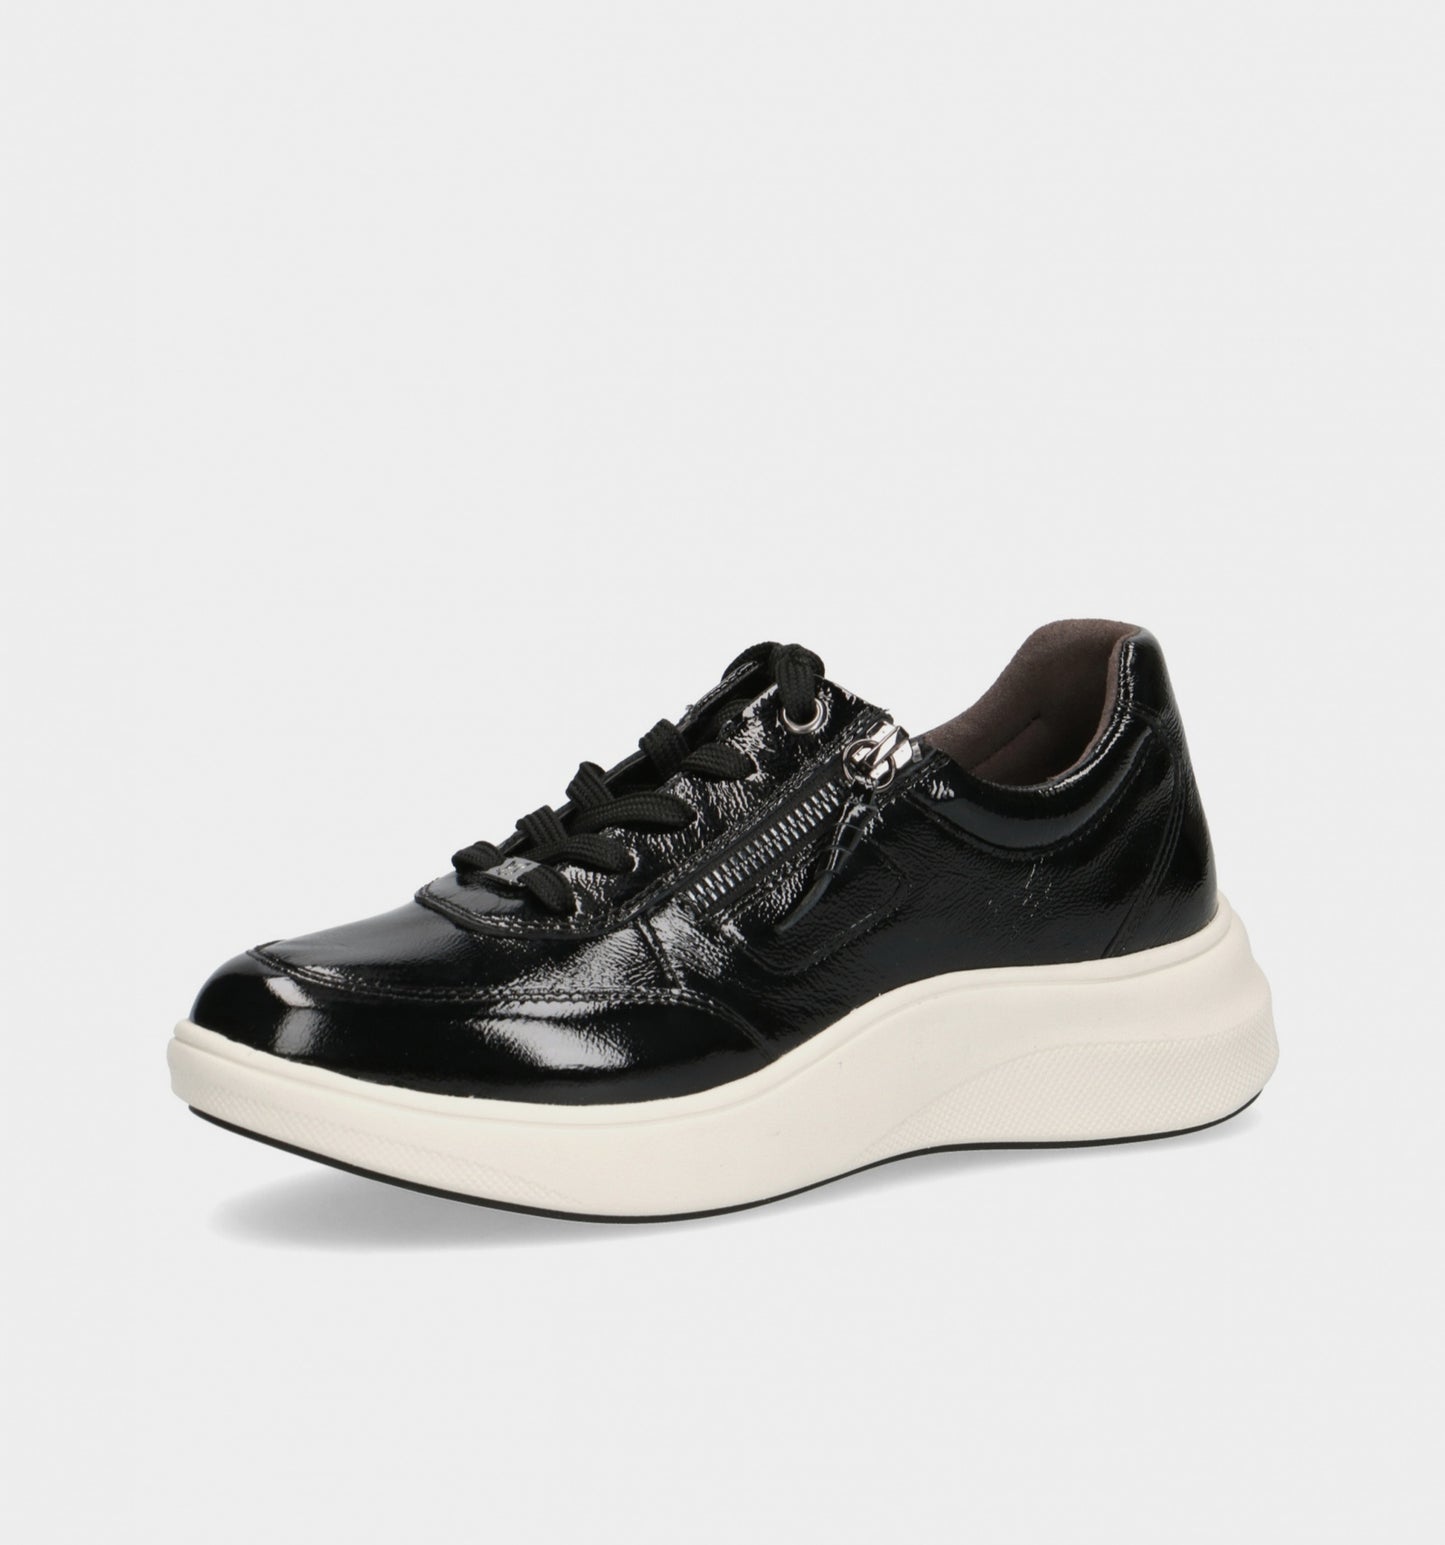 Caprice Patent Black leather Lace up side zip trainer Only size 3.5 and 5 left